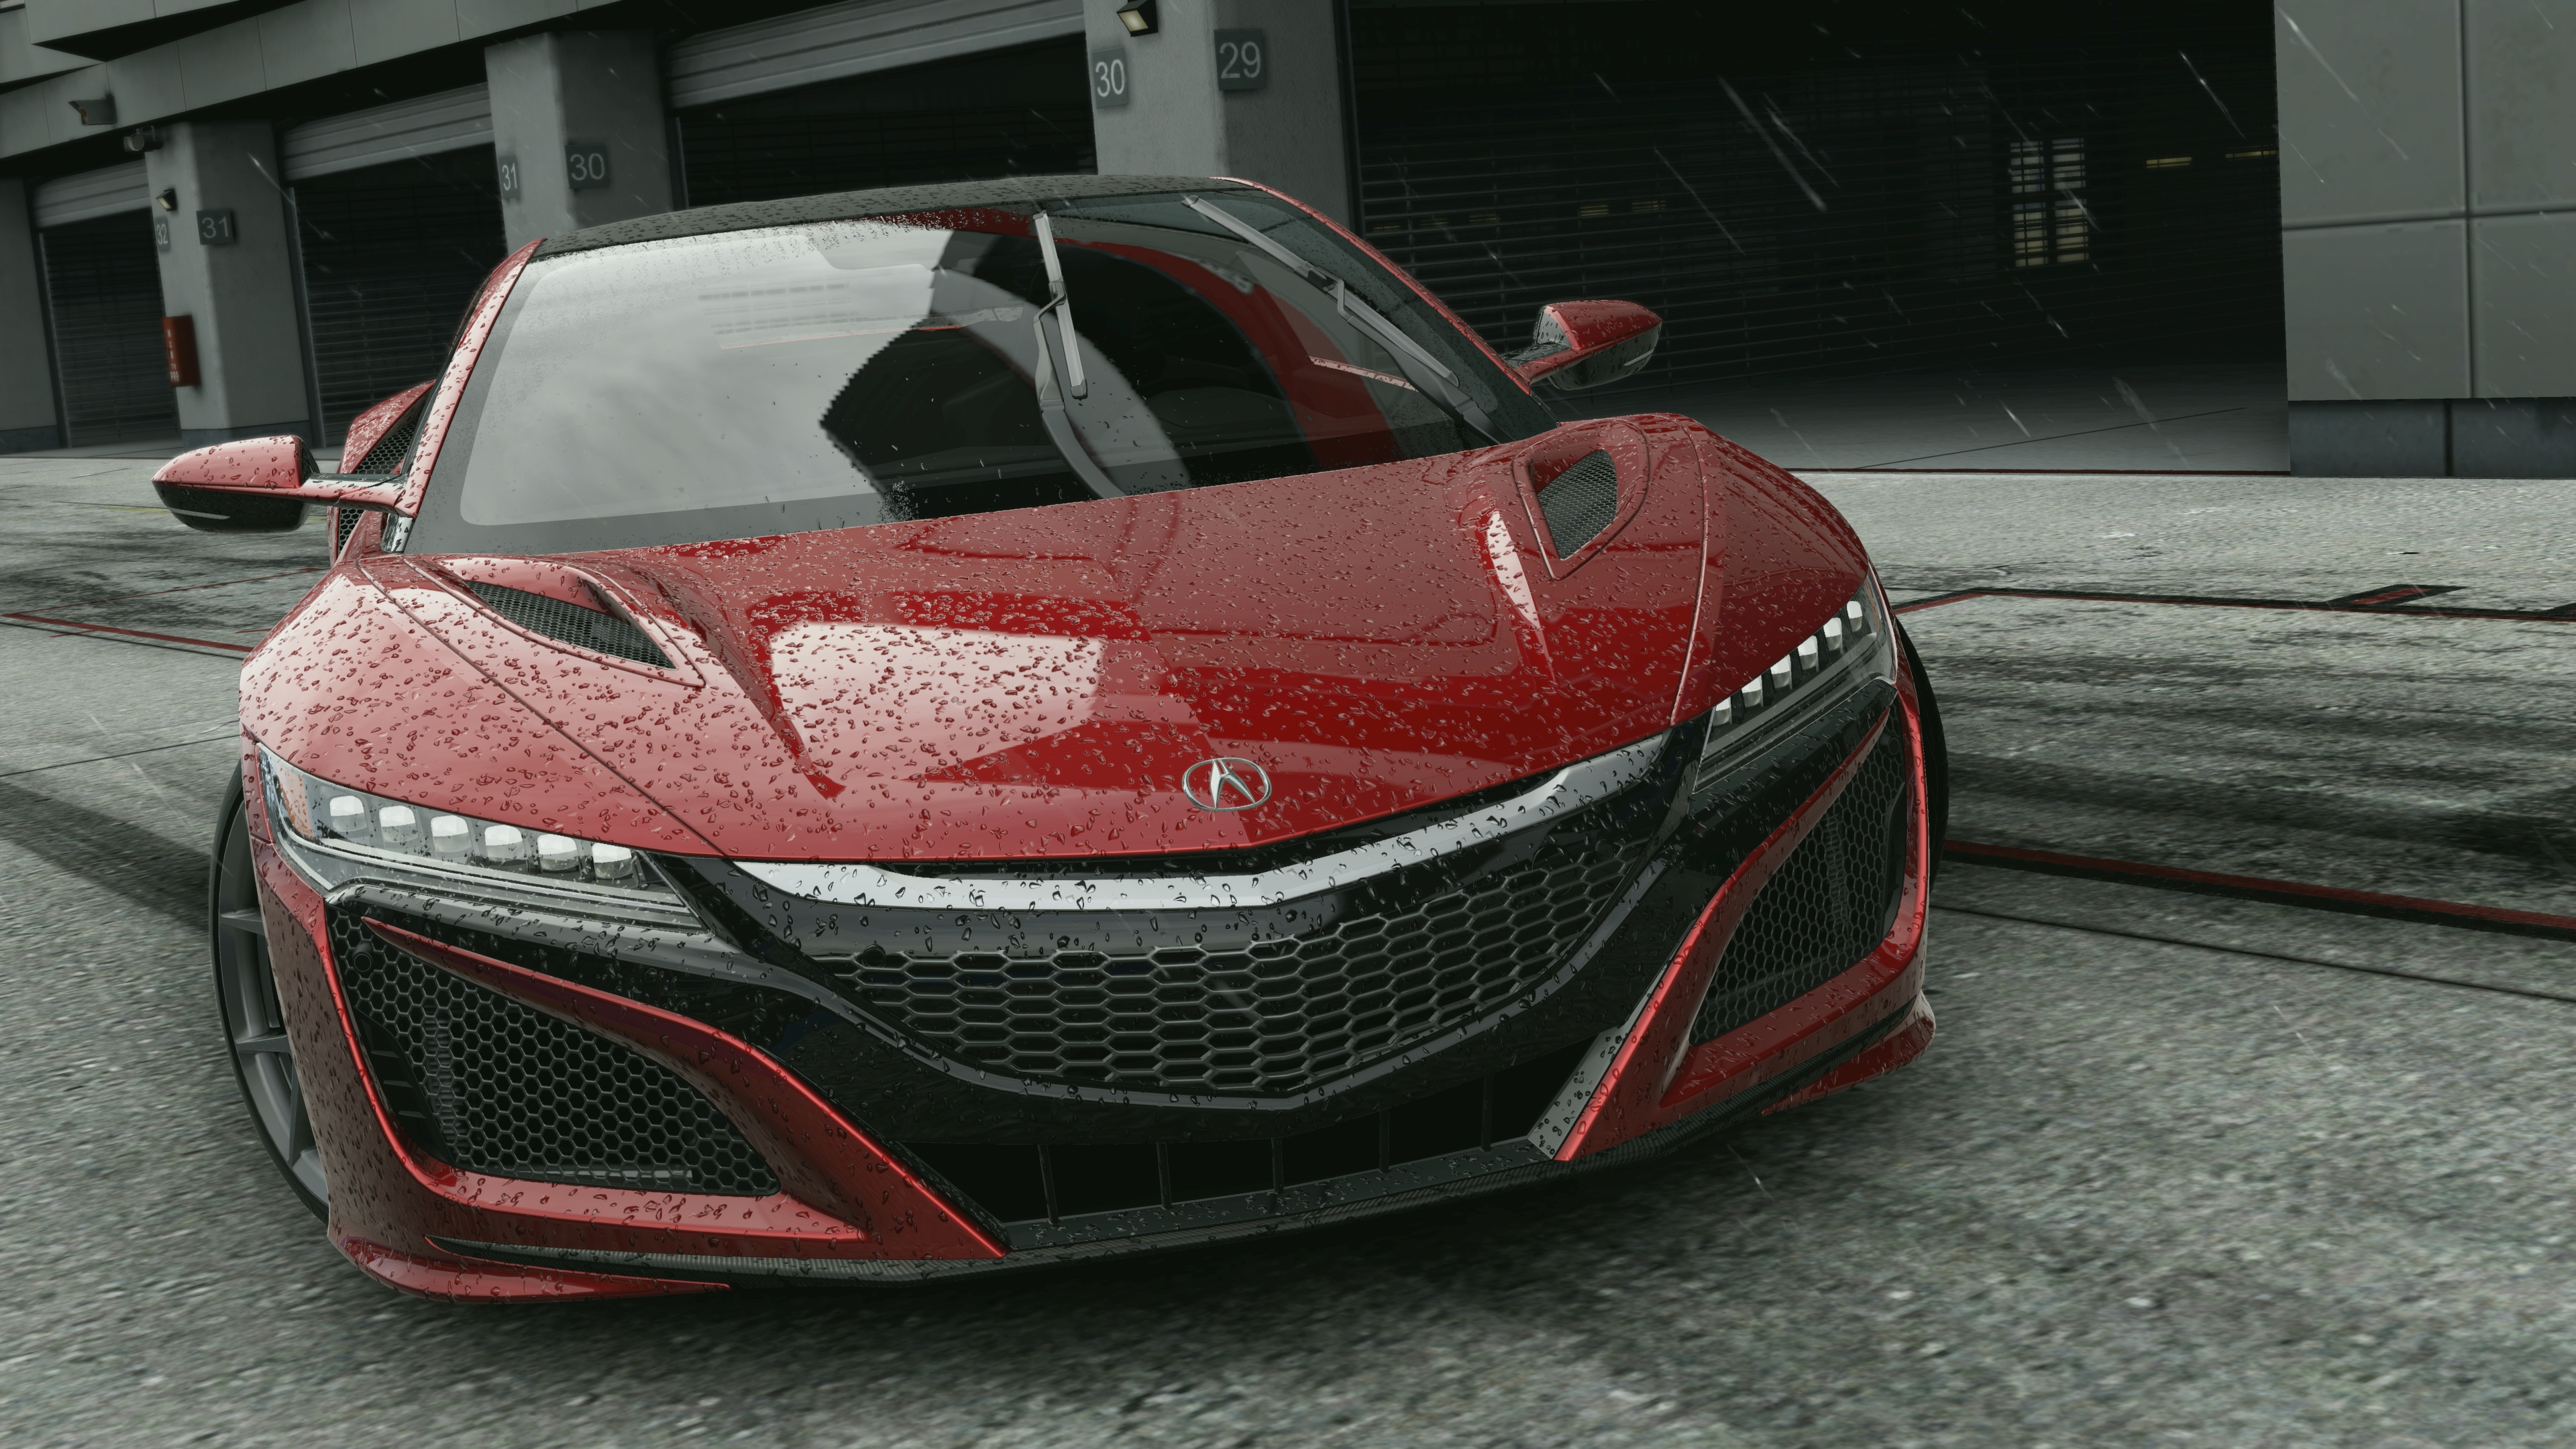 Media asset in full size related to 3dfxzone.it news item entitled as follows: Bandai Namco e Slightly Mad Studios annunciano il racing game Project CARS 2 | Image Name: news25776_Project-CARS-2-Screenshot_3.jpg